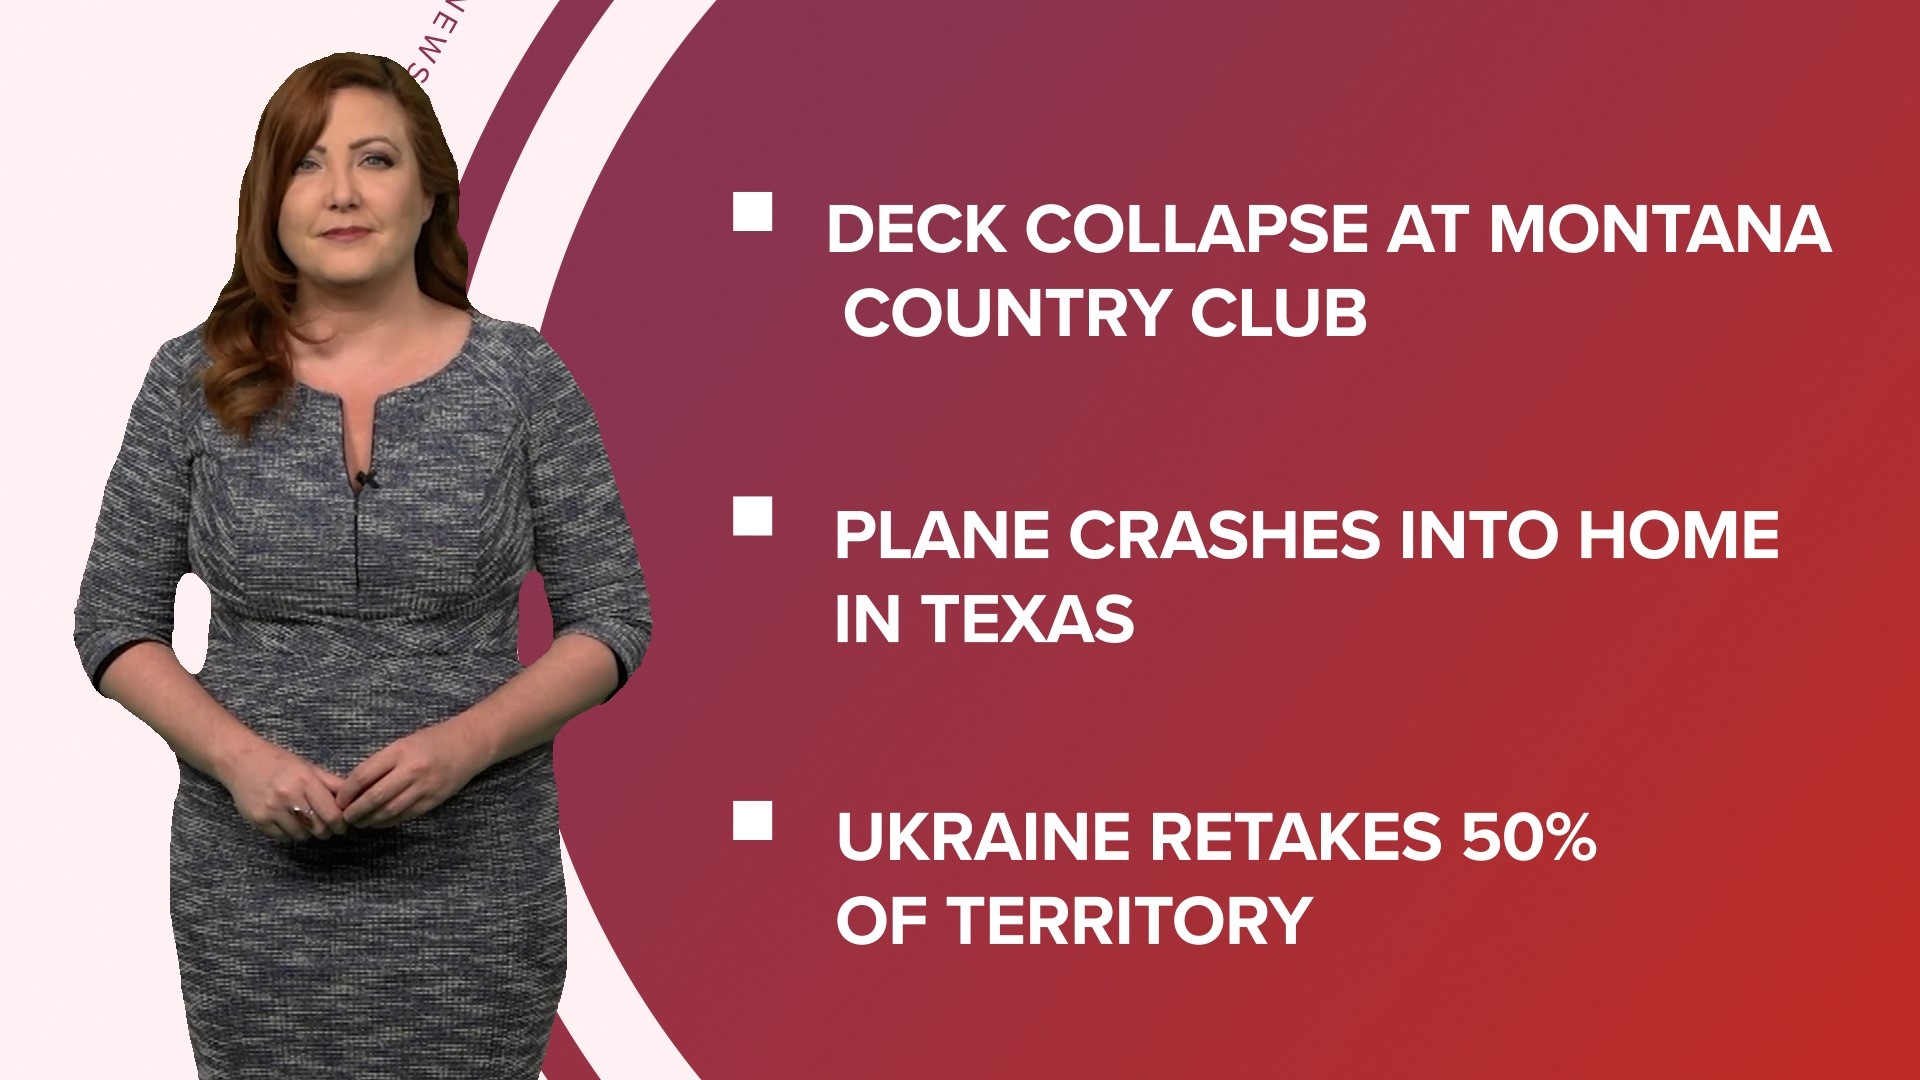 A look at what is happening in the news from a deck collapsing in Montana to a plane crashing into a TX home and the weekend box office numbers for 'Barbenheimer.'